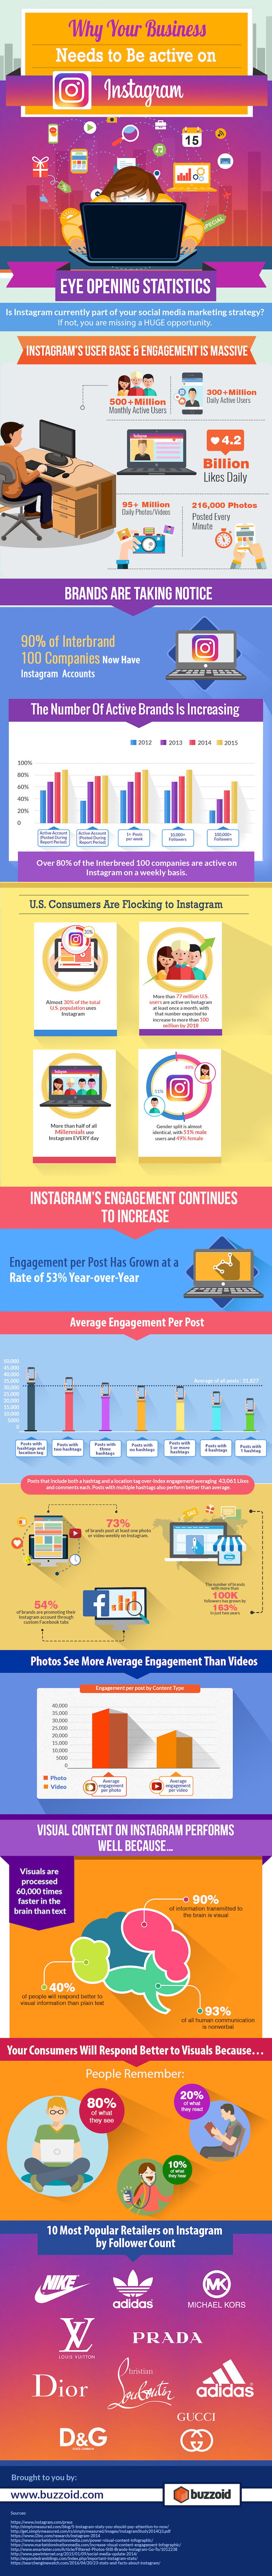 Why Instagram is a Potential Marketing Goldmine (Infographic)